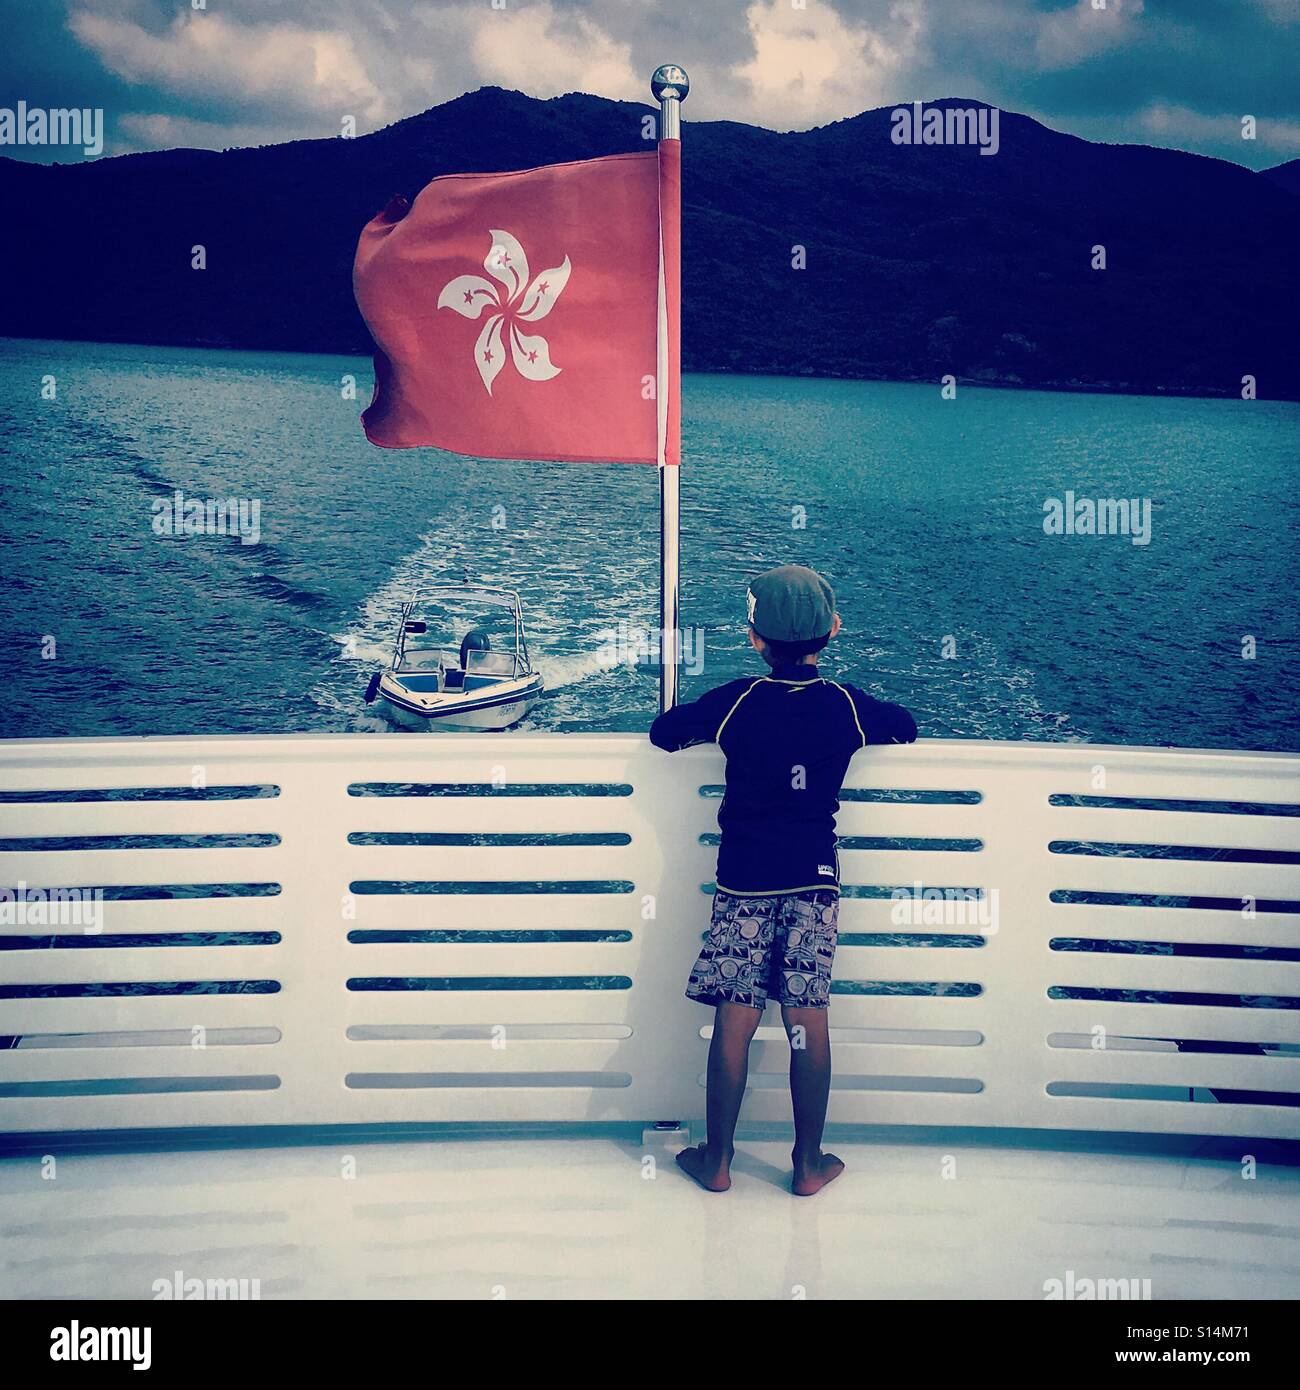 Kid on a boat with Hong Kong flag Stock Photo